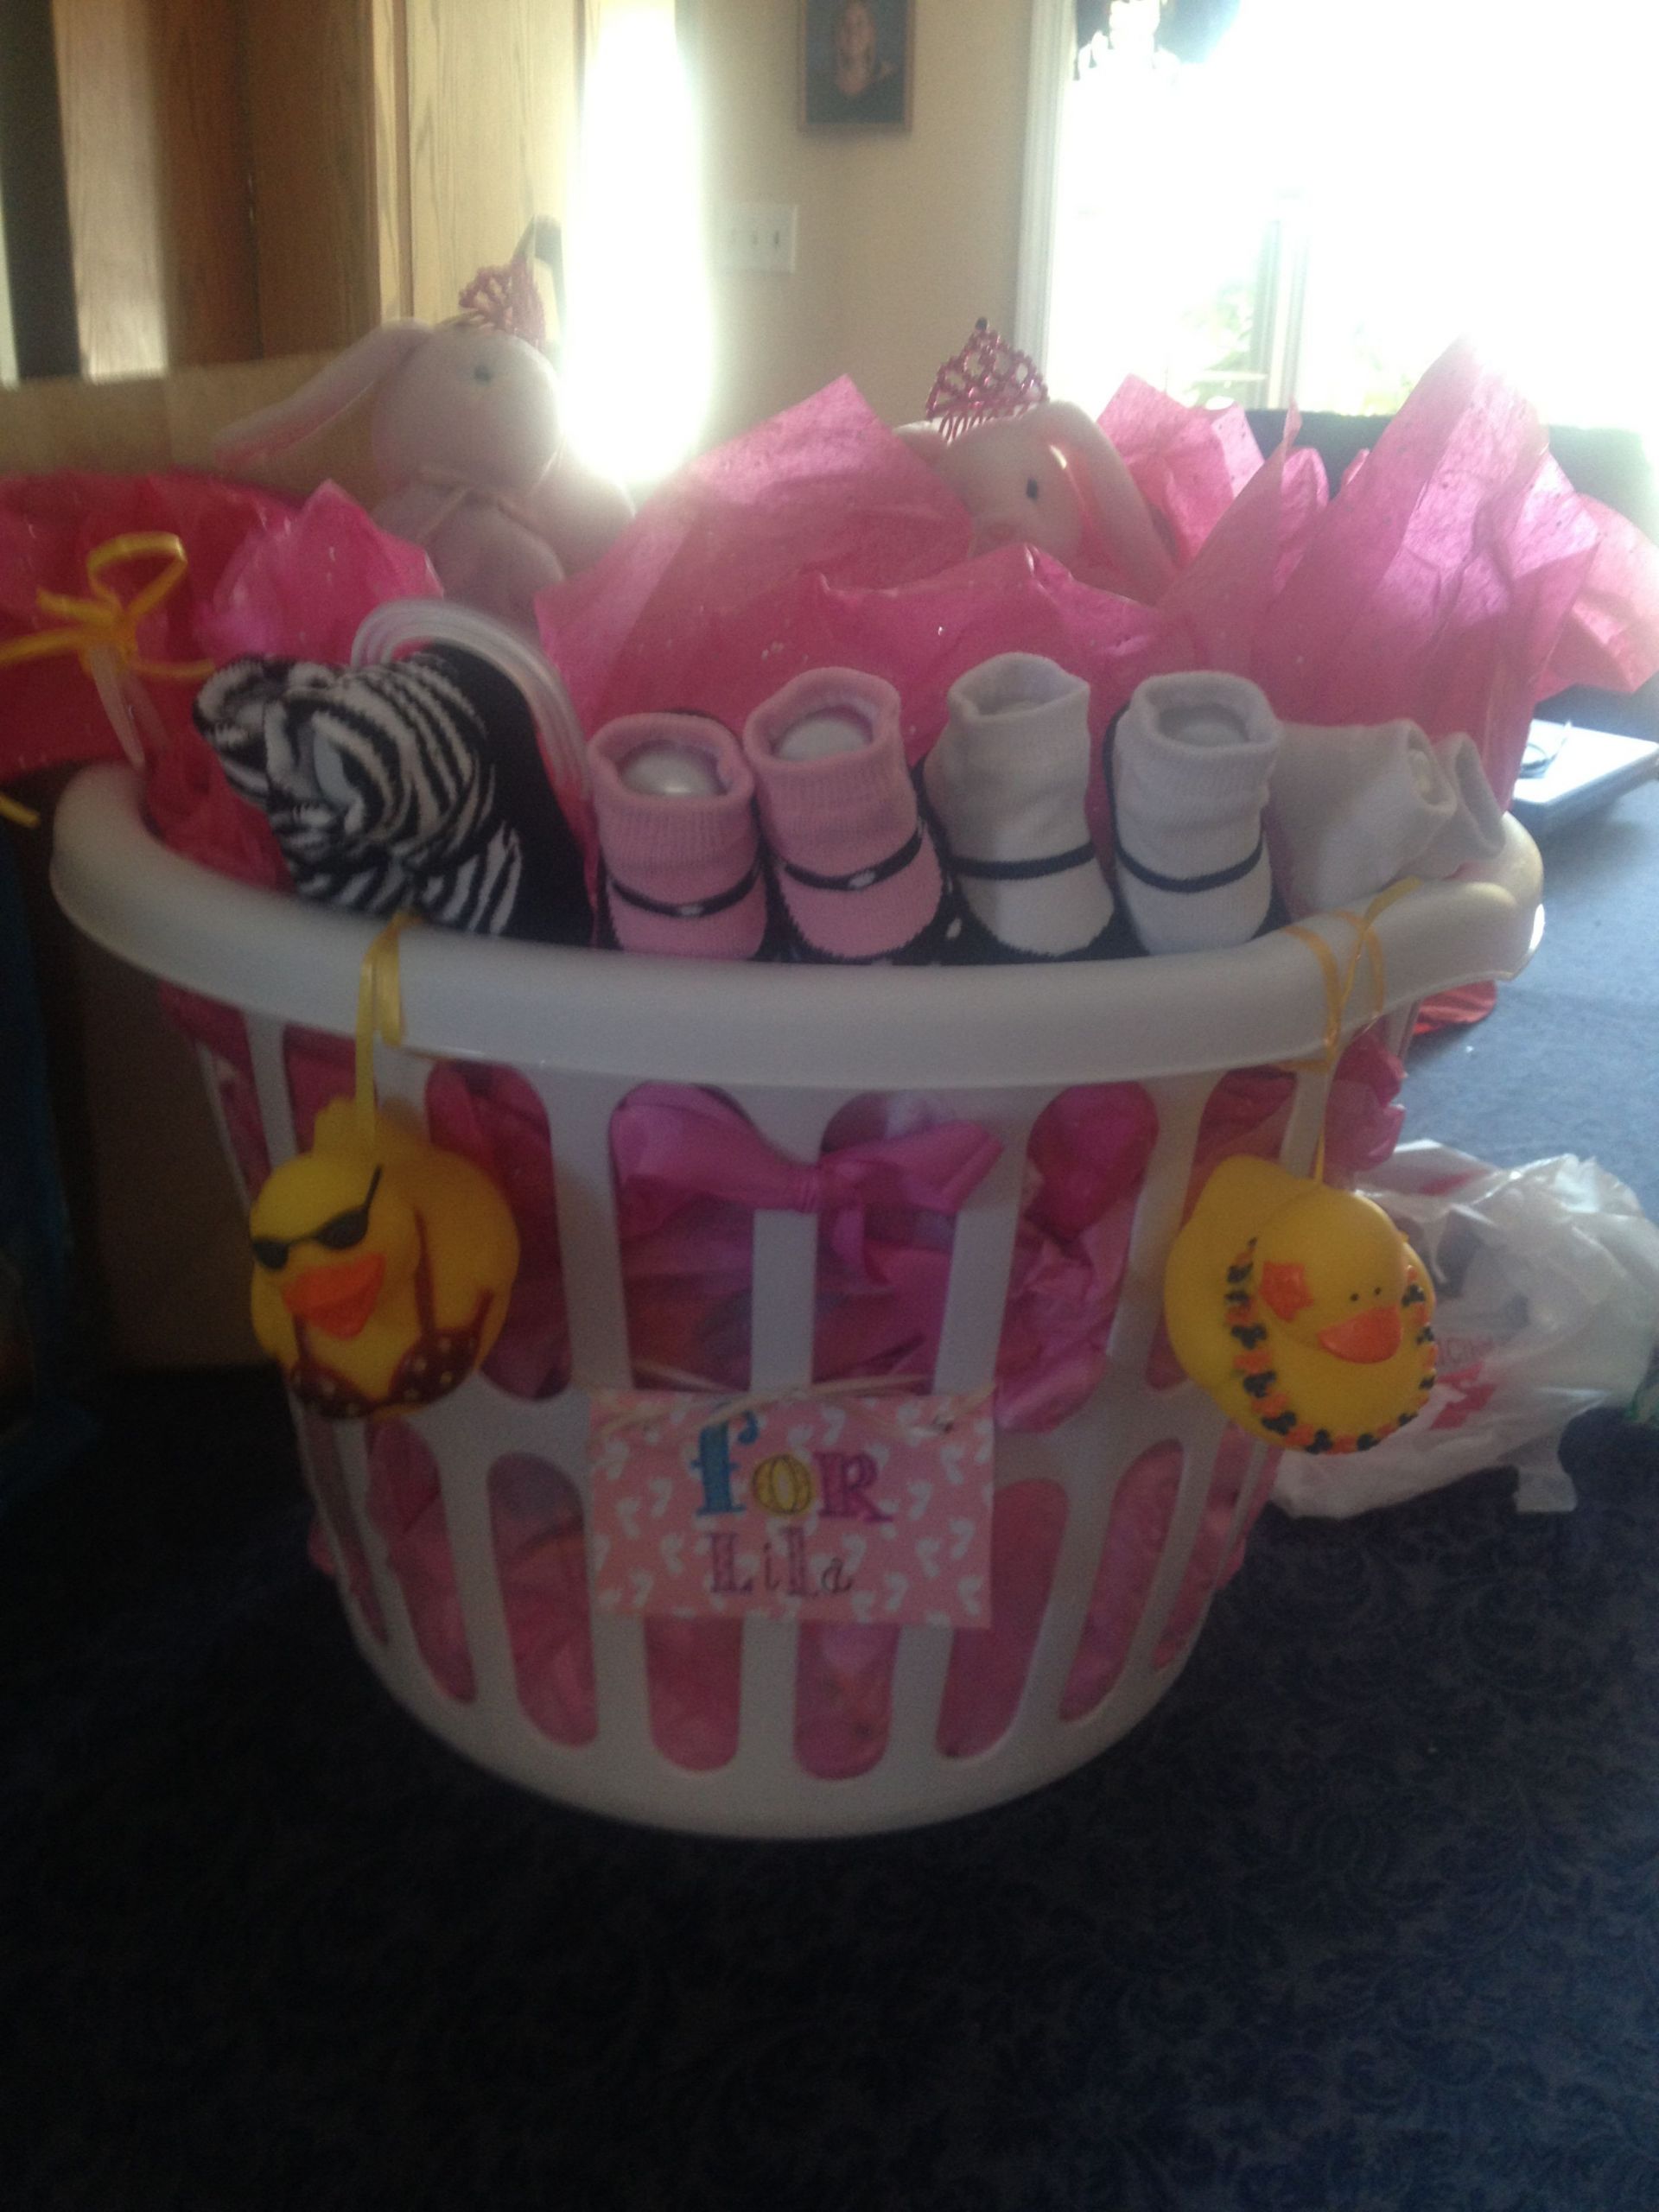 Laundry Basket Gift Ideas
 Baby shower t Fill a laundry basket with all the baby